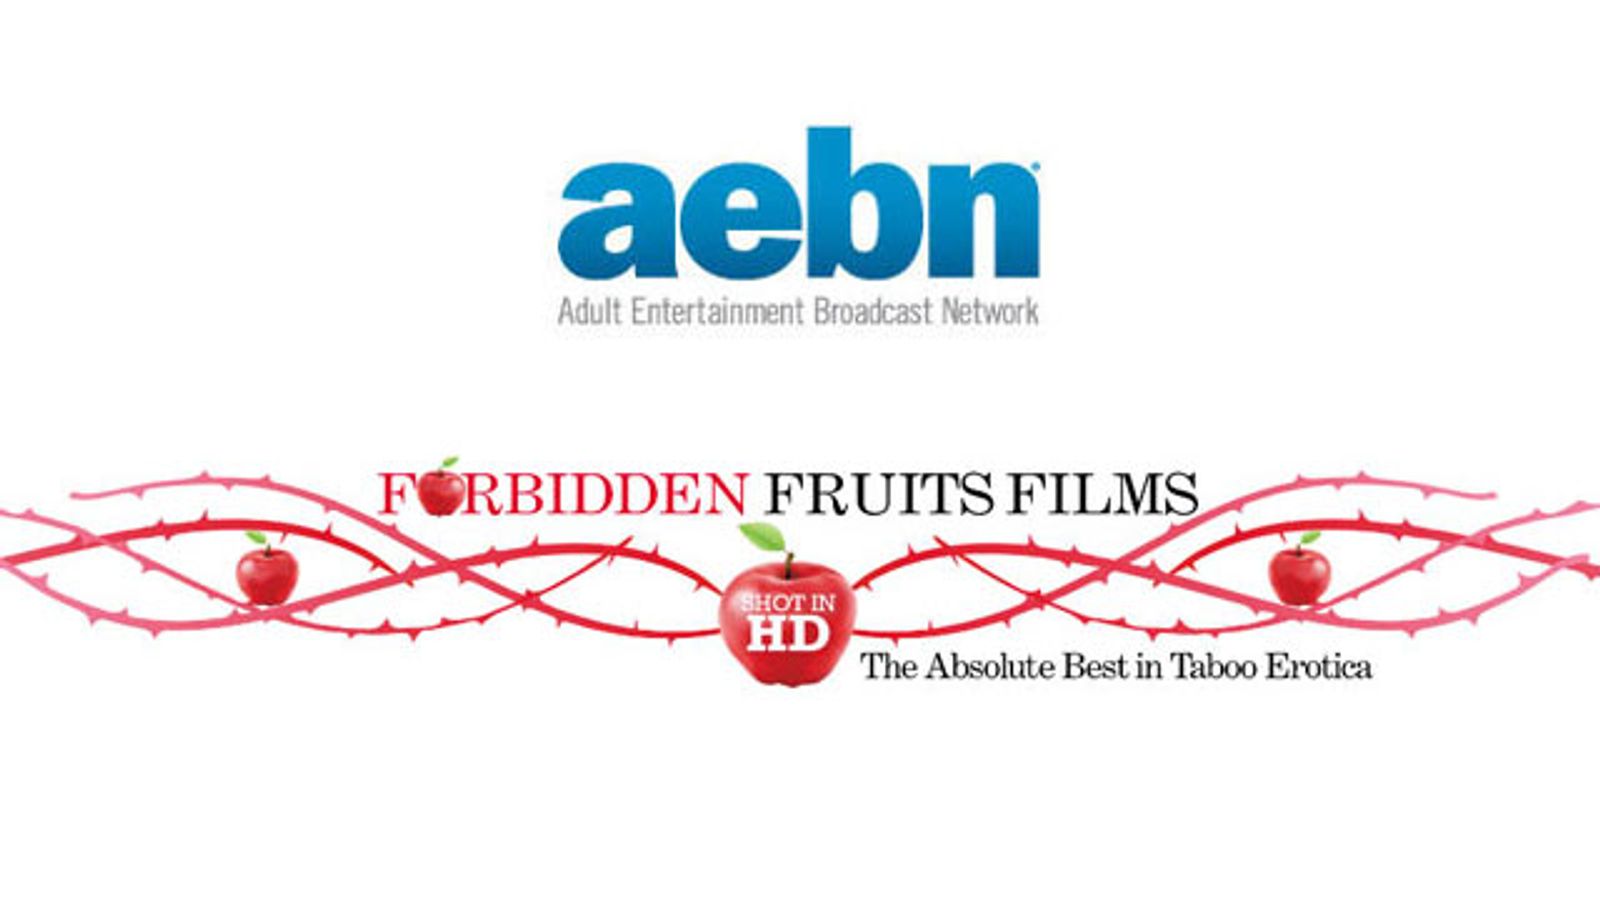 AEBN Offers Exclusive Forbidden Fruits Films Lesbian Line